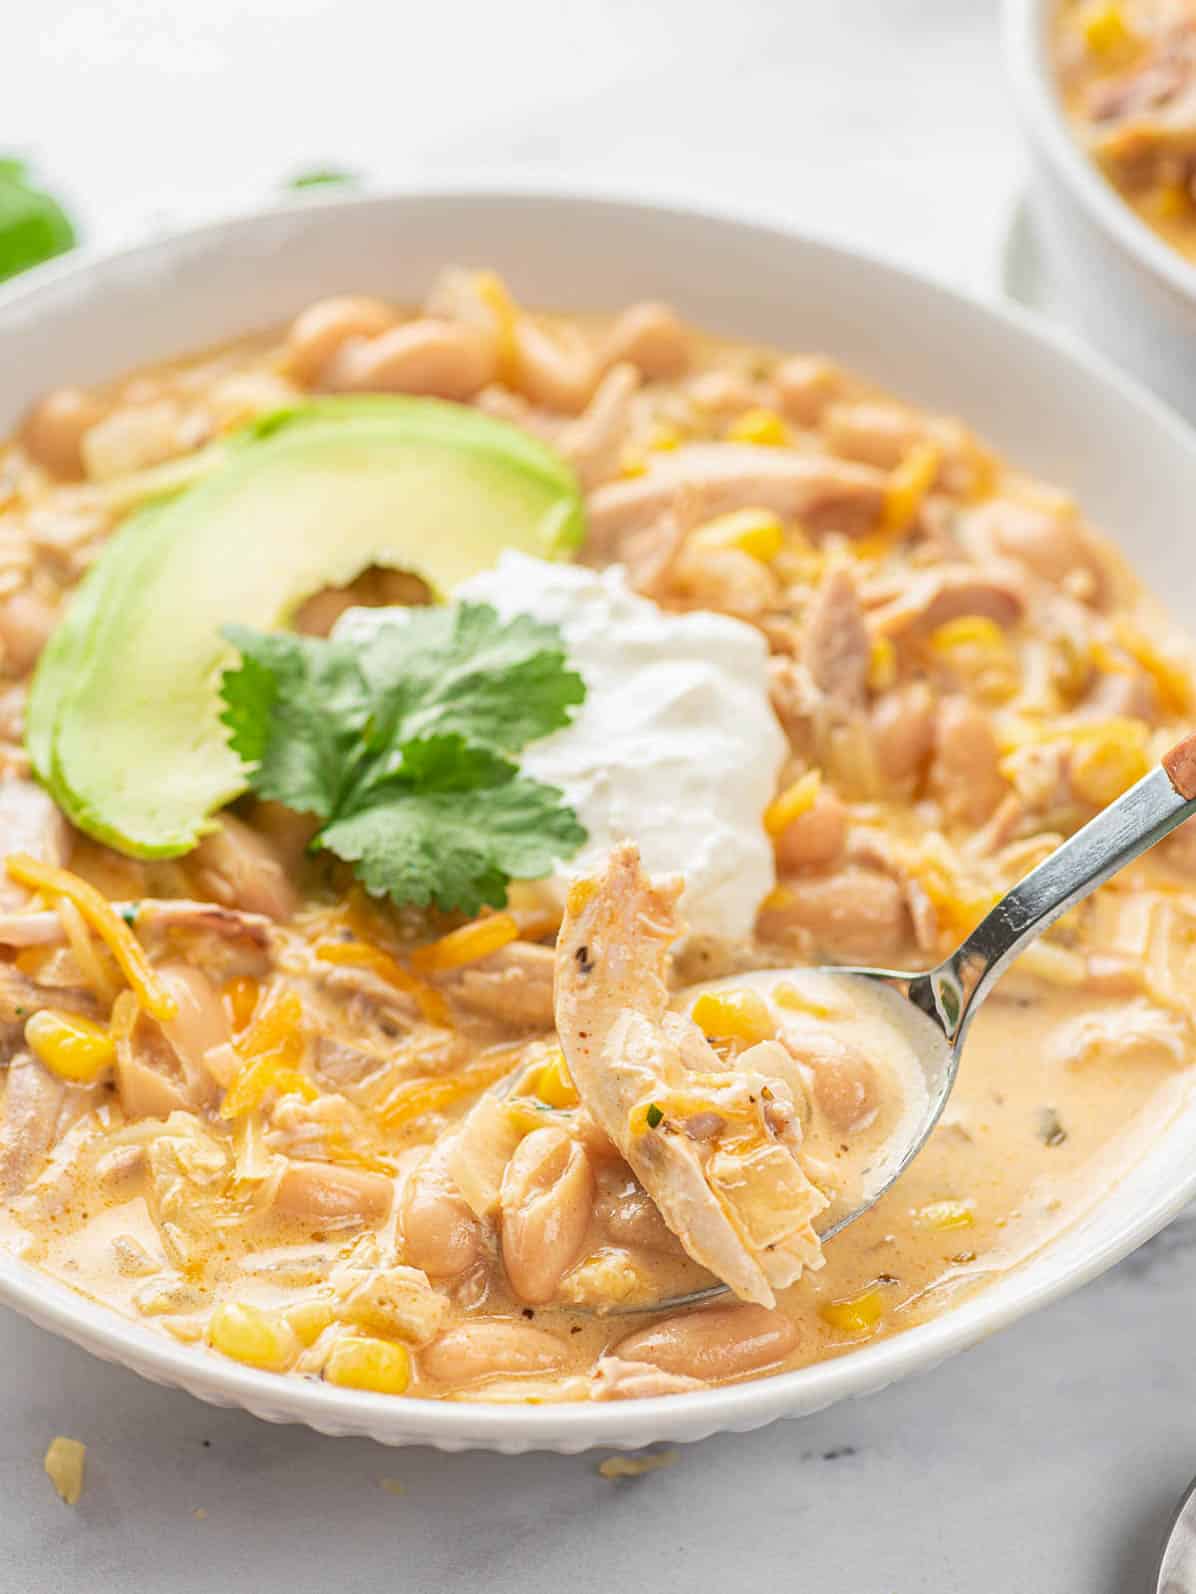 spoon scooping white chicken chili from plate